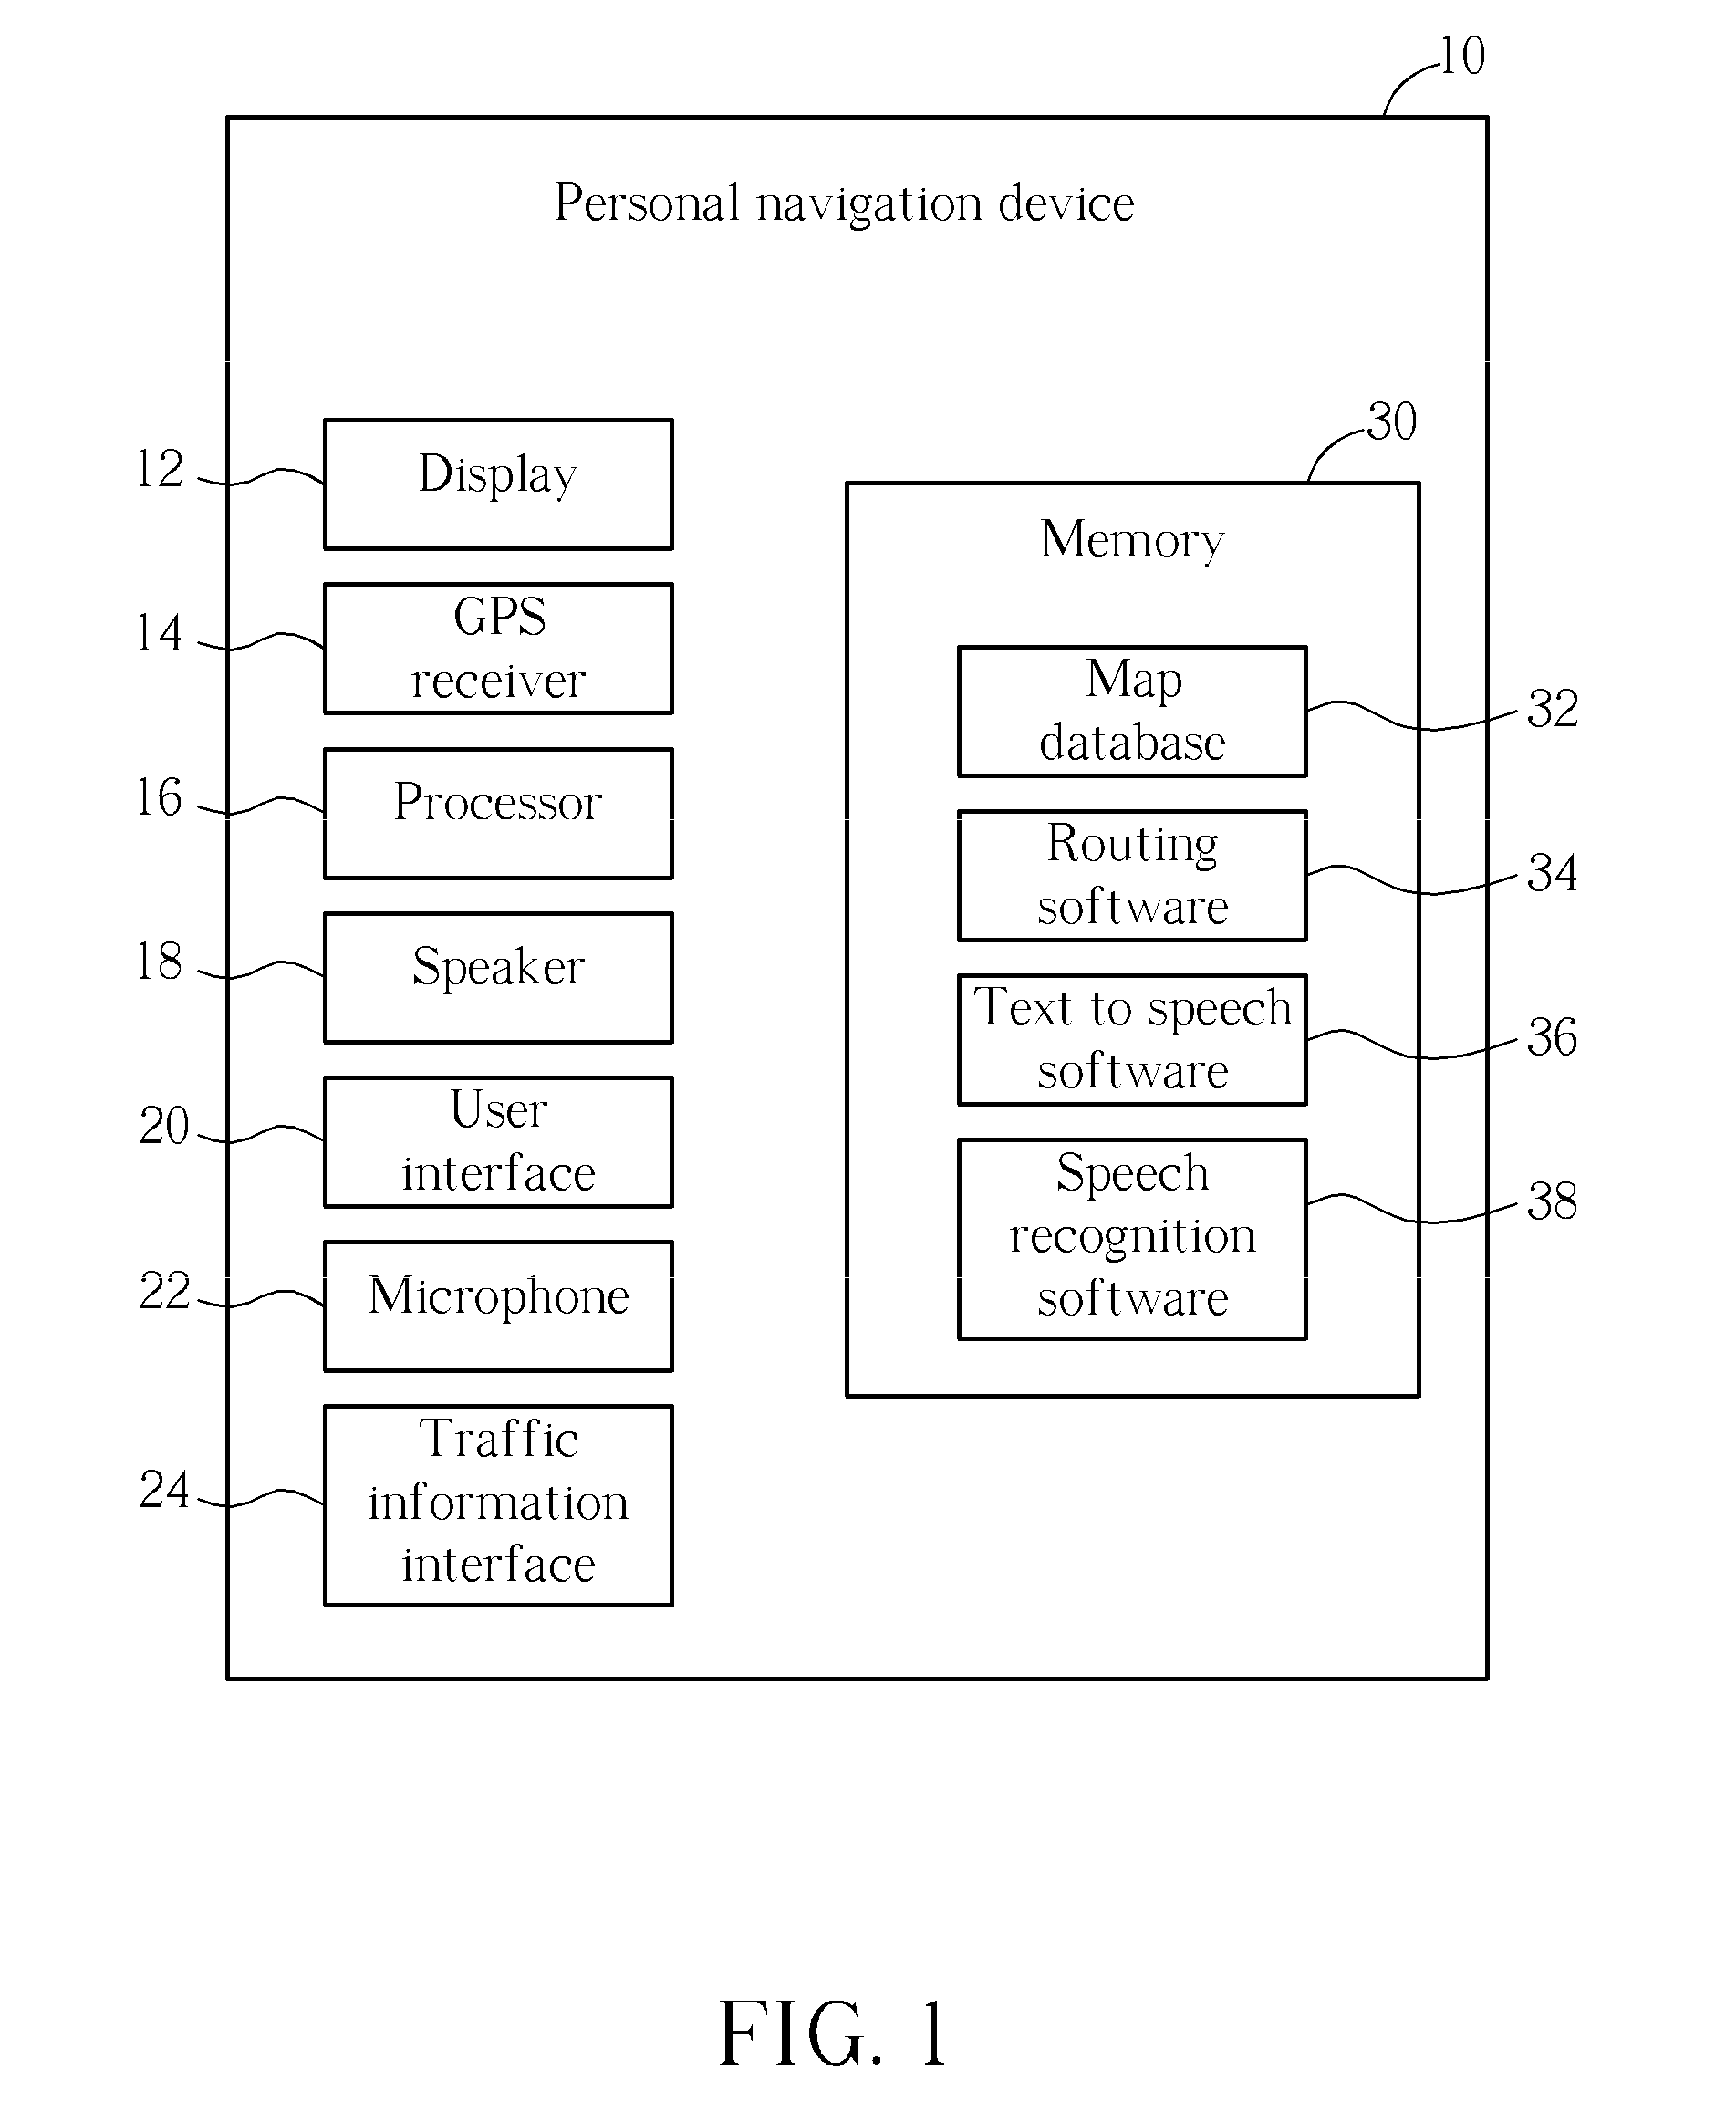 Method of utilizing a personal navigation device to suggest alternate routes being identified by recognizable street names